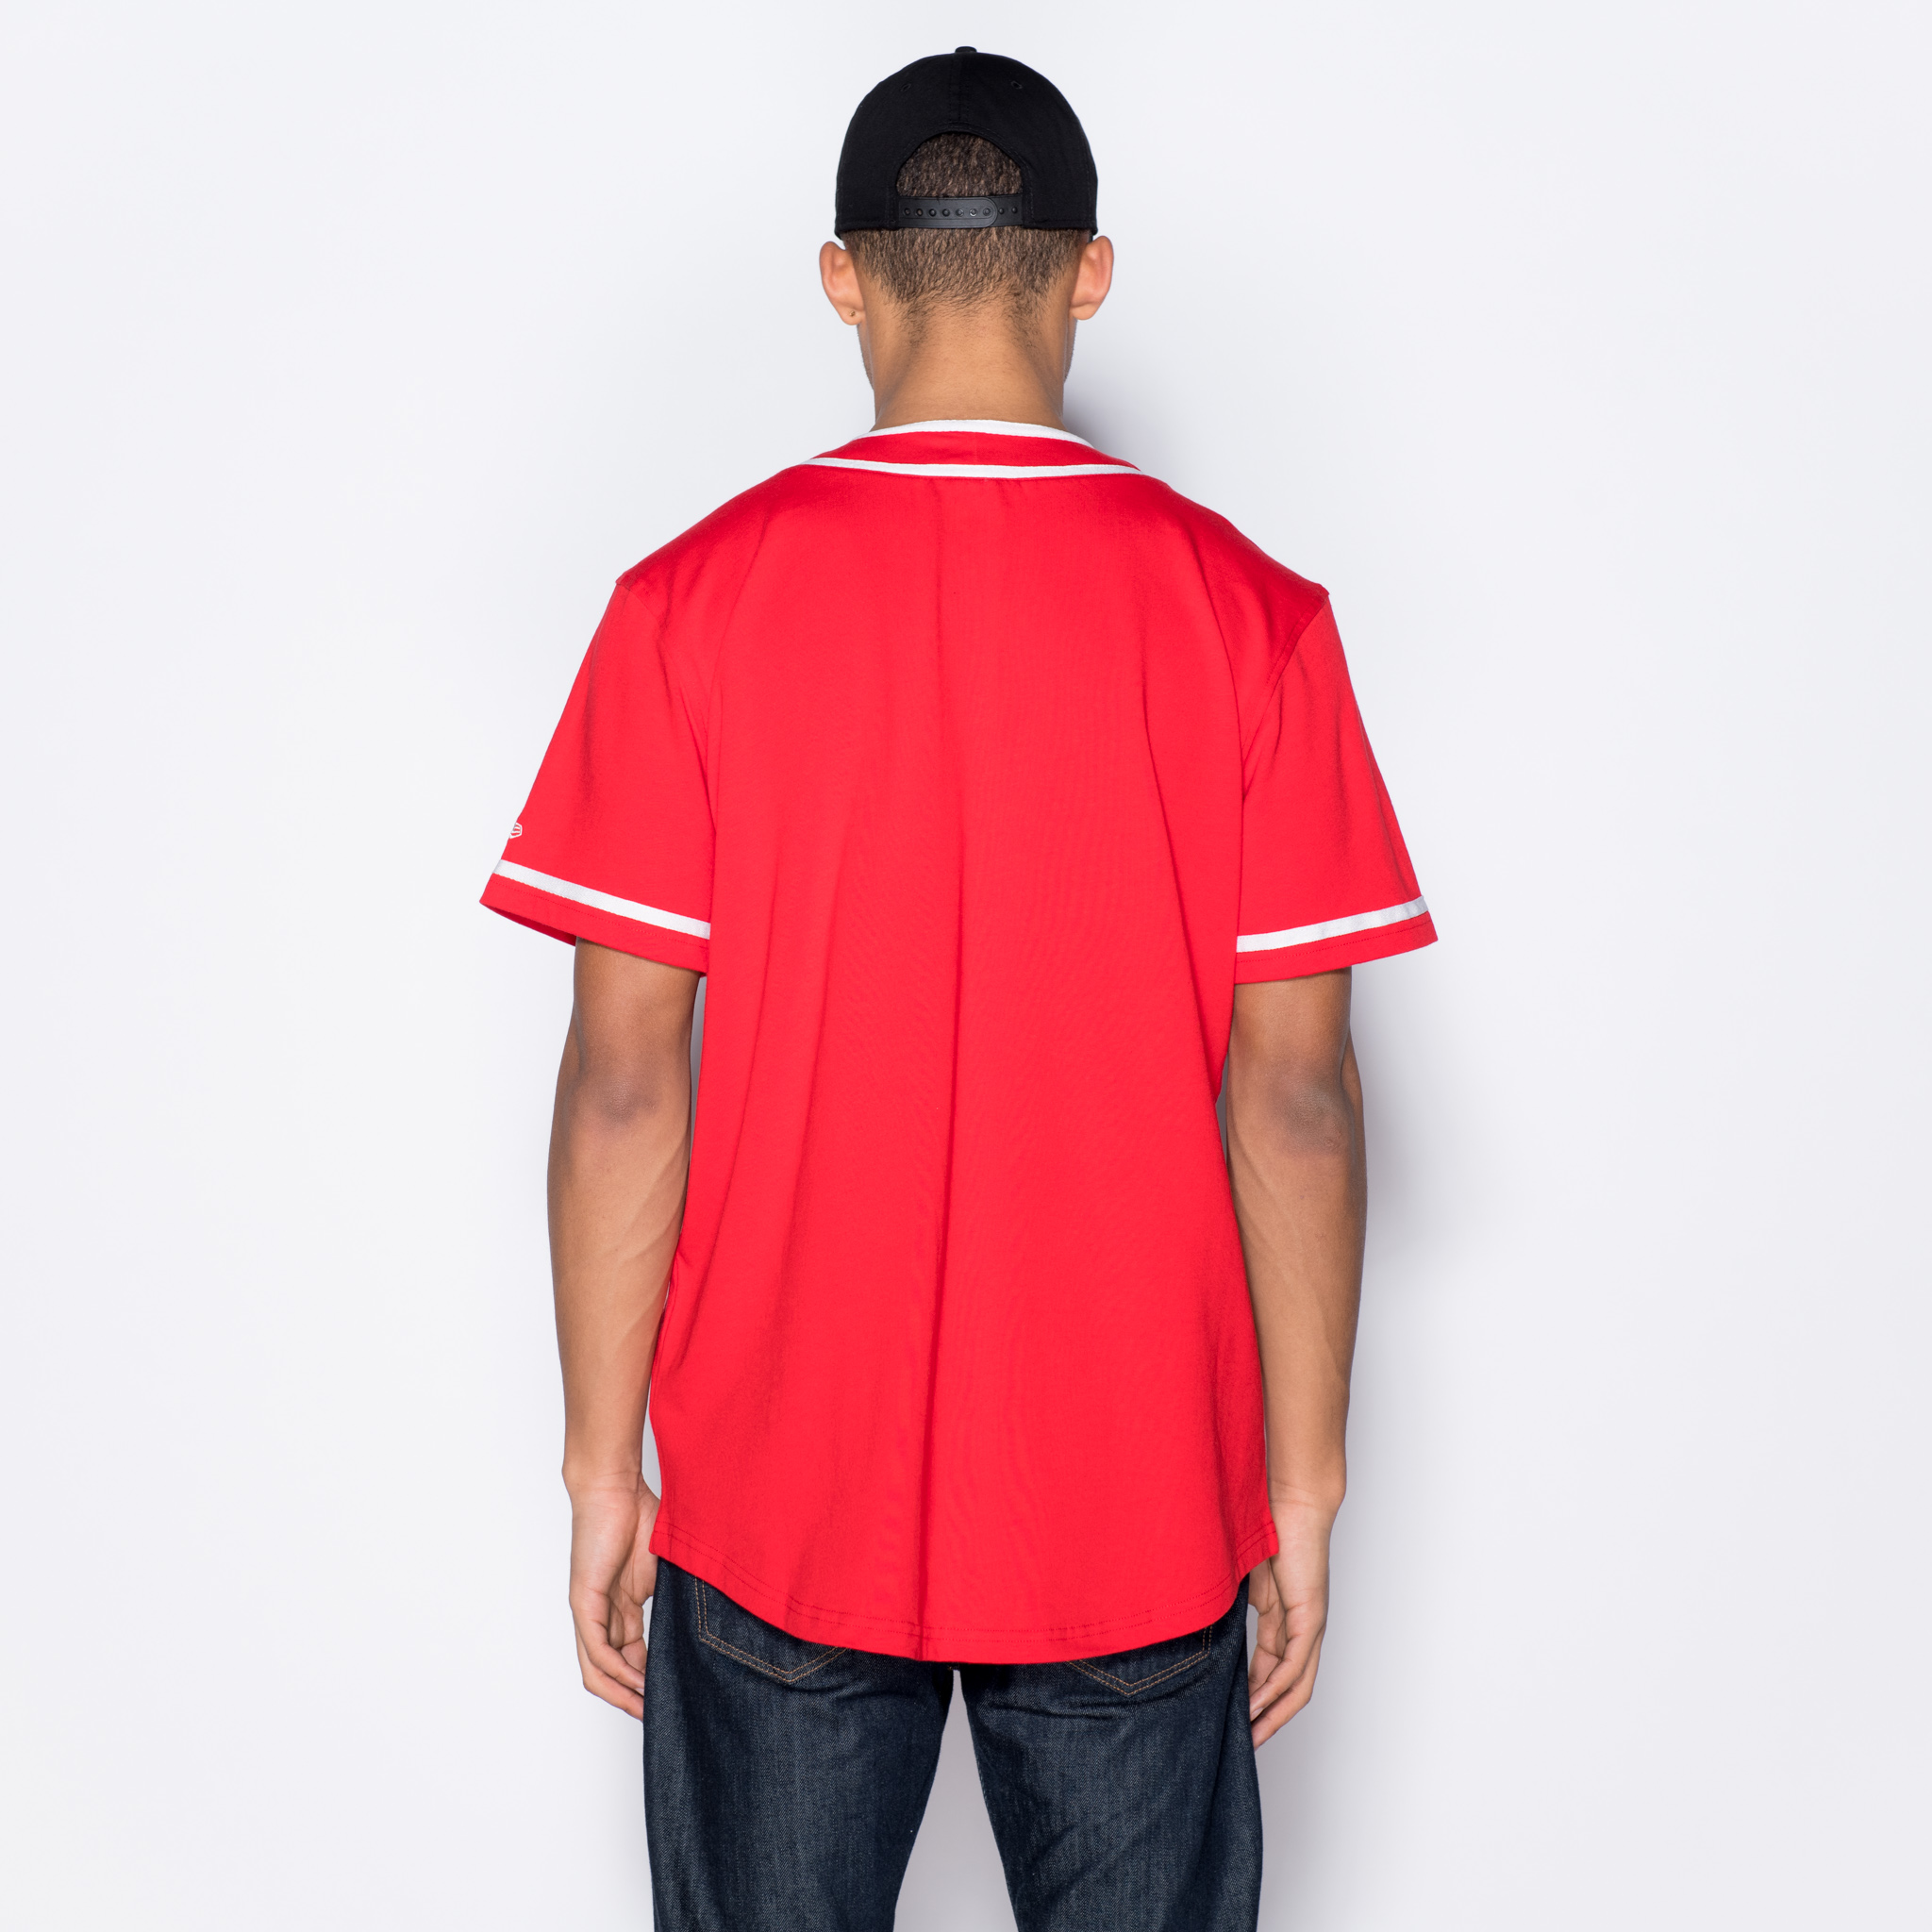 Philadelphia 76ERS Button Up Red Tee